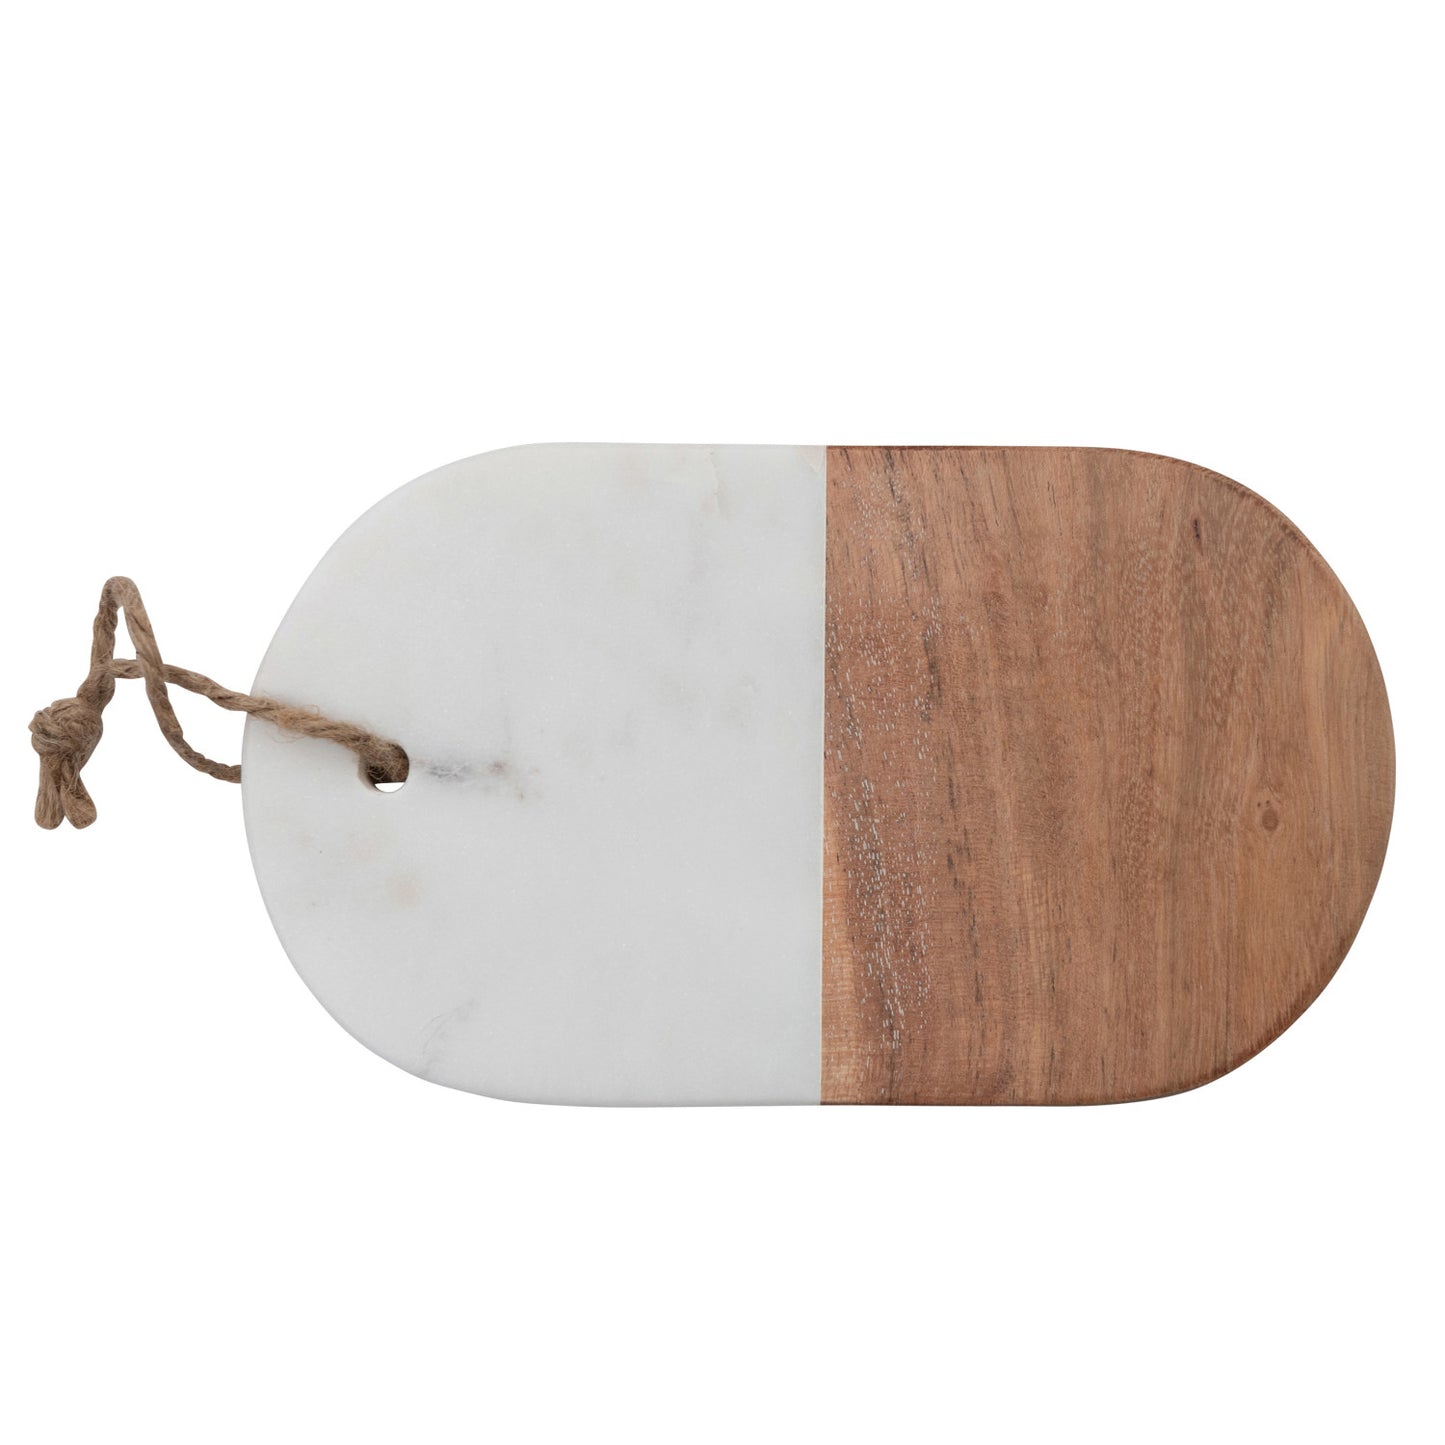 Marble & Acacia Wood Cheese/Cutting Board with Jute Tie